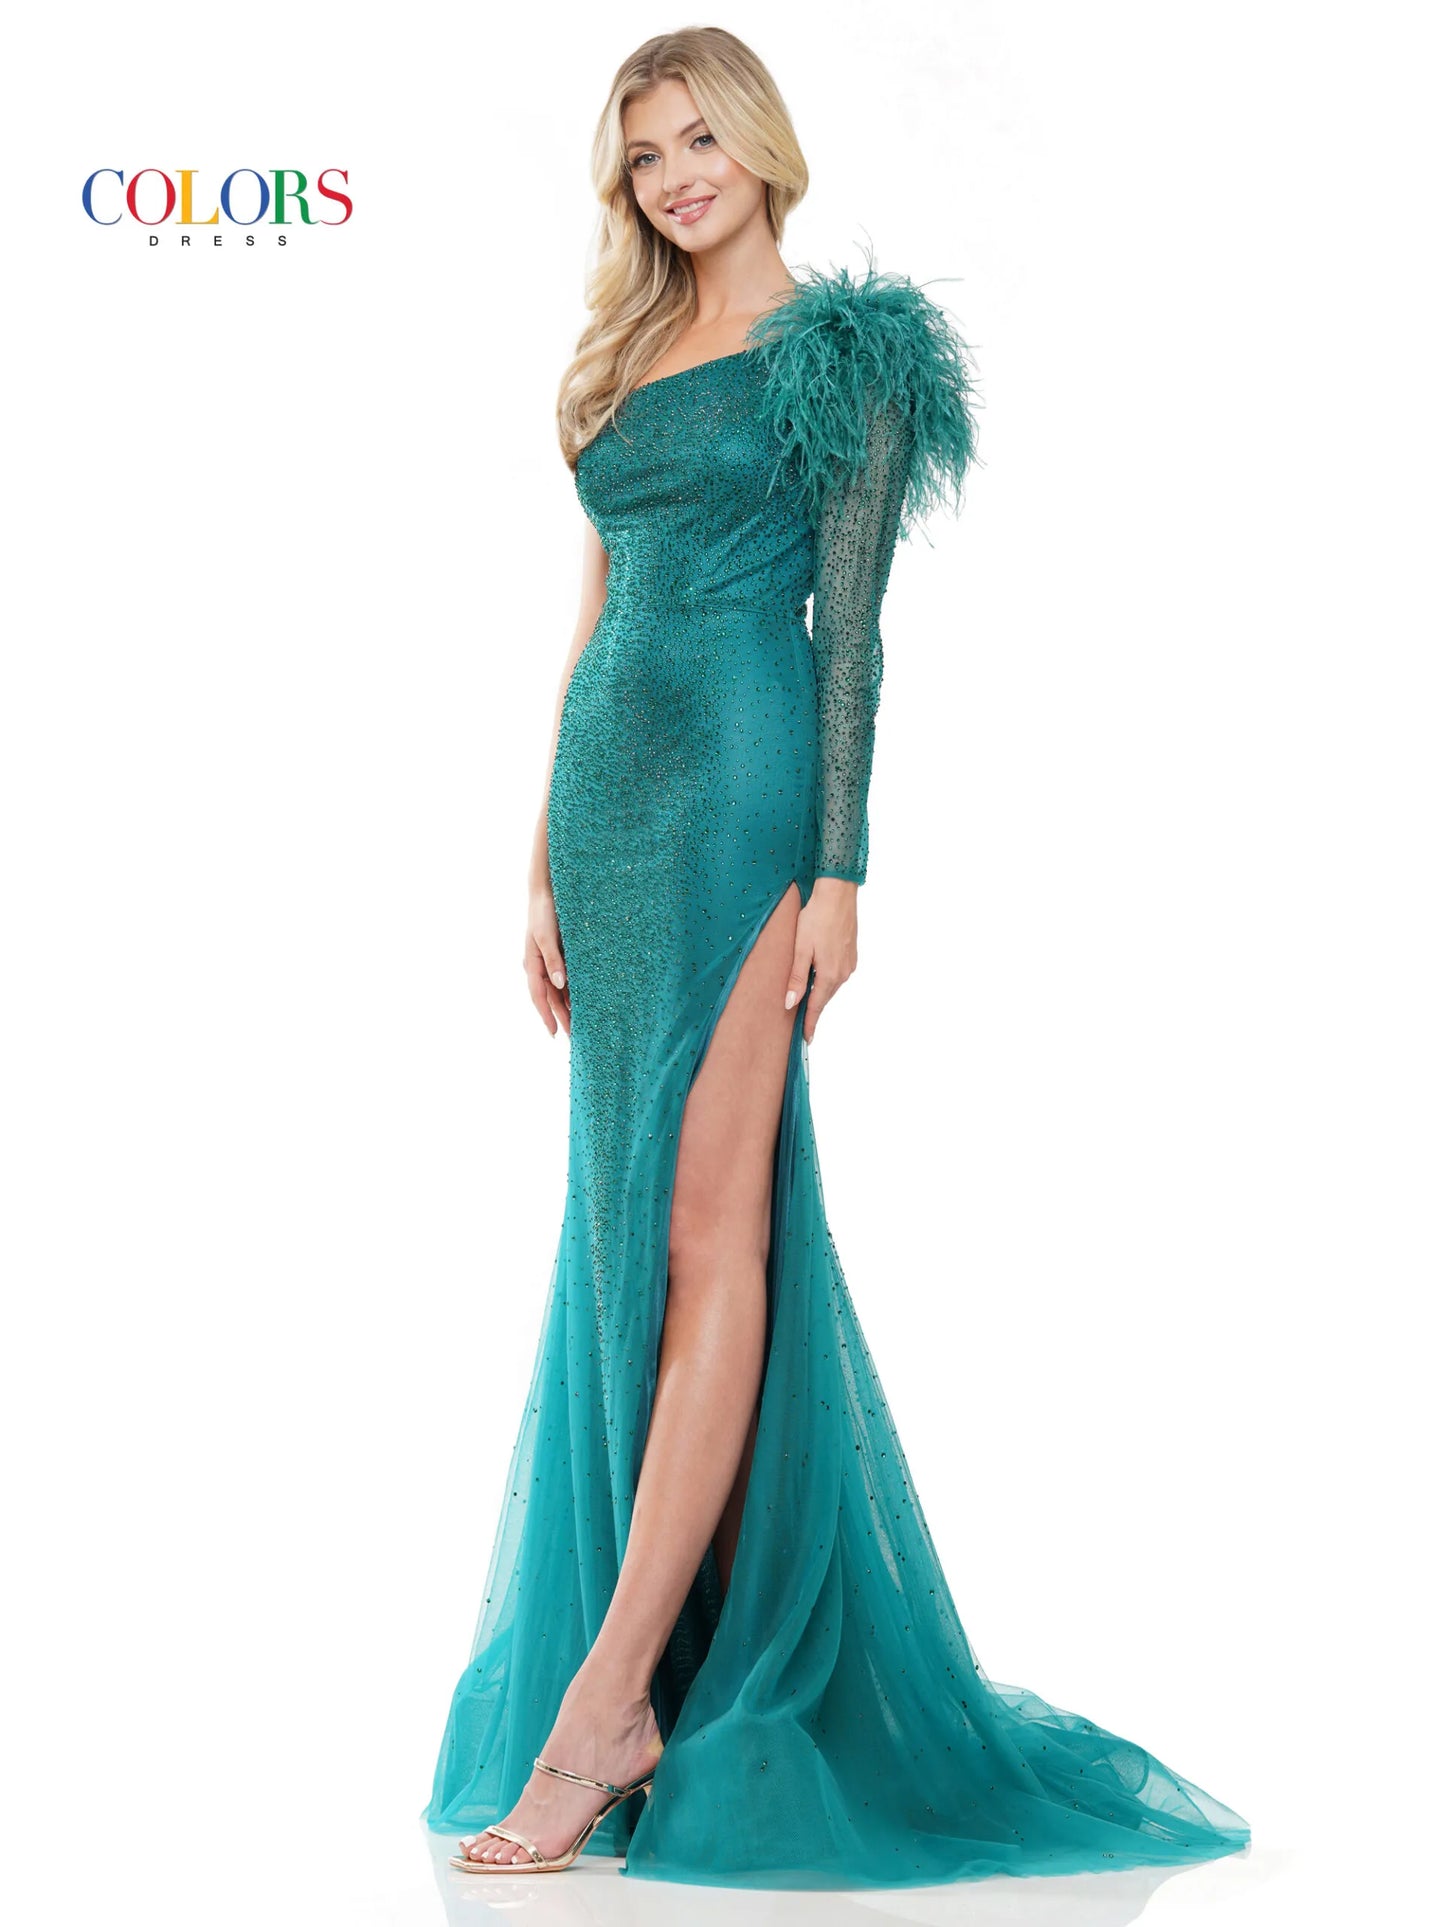 This Colors Dress 3251 one shoulder long sleeve feather prom dress will make you stand out at any formal event. The high slit and sheer feather details add a touch of elegance, while the crystal embellishments add a touch of sparkle. Perfect for those who want to make a statement with their fashion choices.  Sizes: 0-22  Colors: Black, Royal, Deep Green, Hot Pink